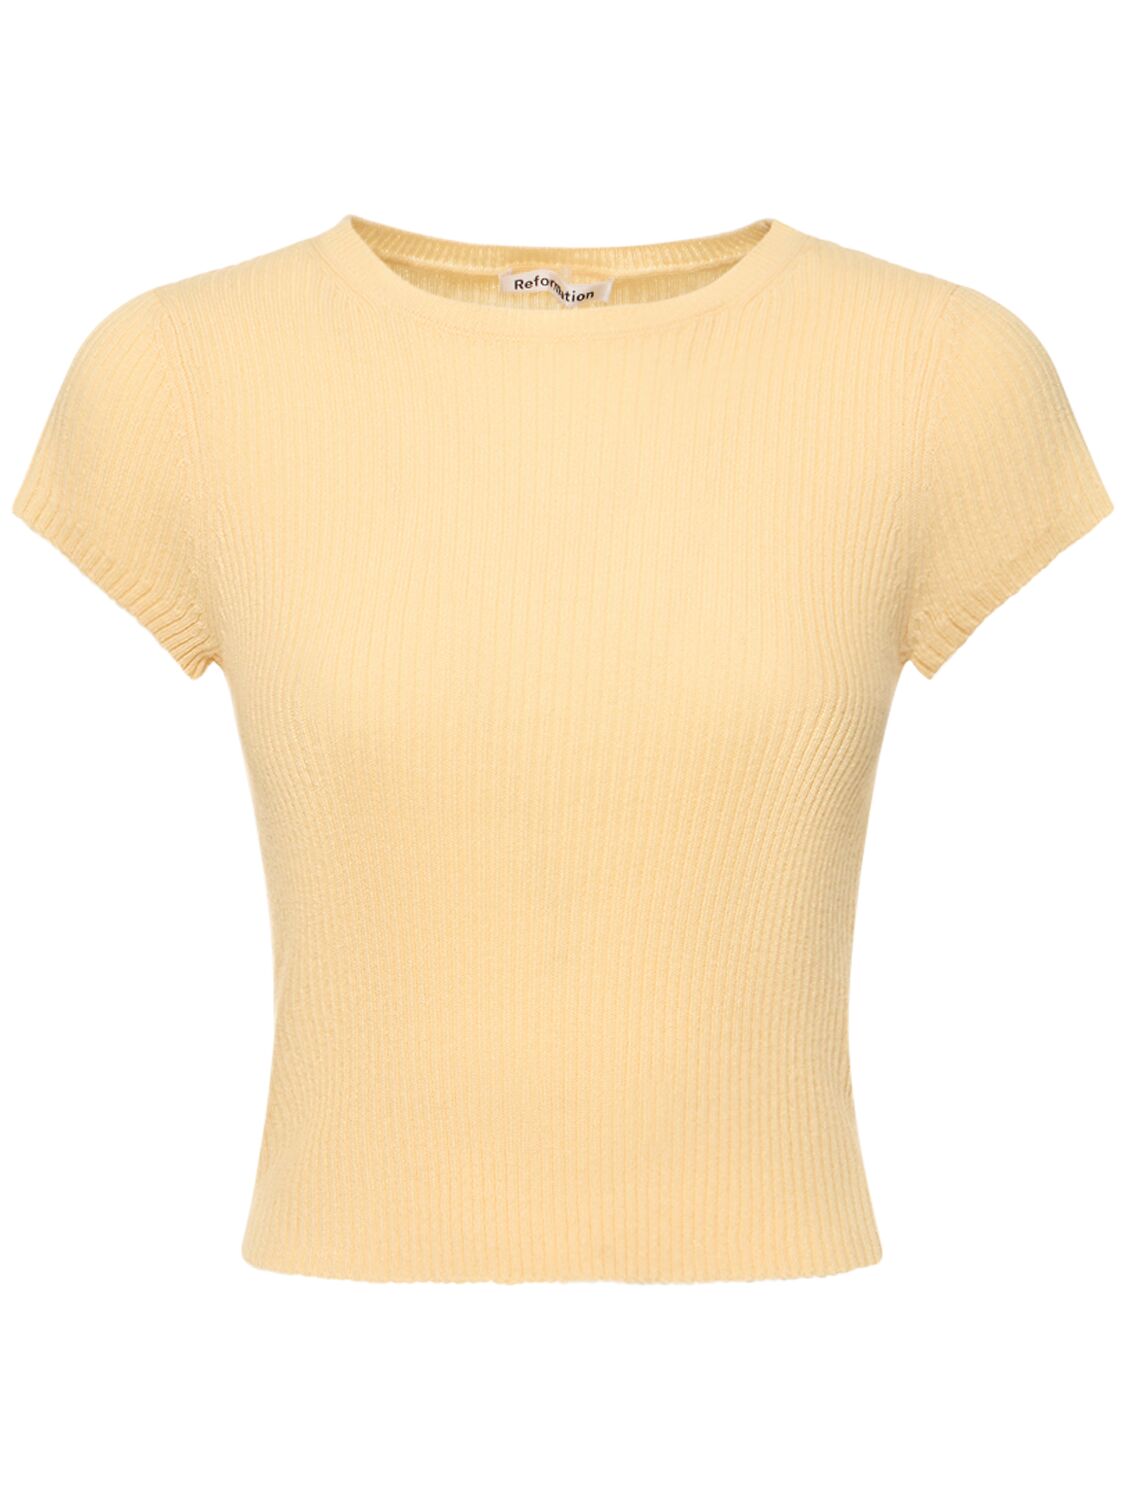 Reformation Teo Short Sleeve Cashmere Jumper In Yellow